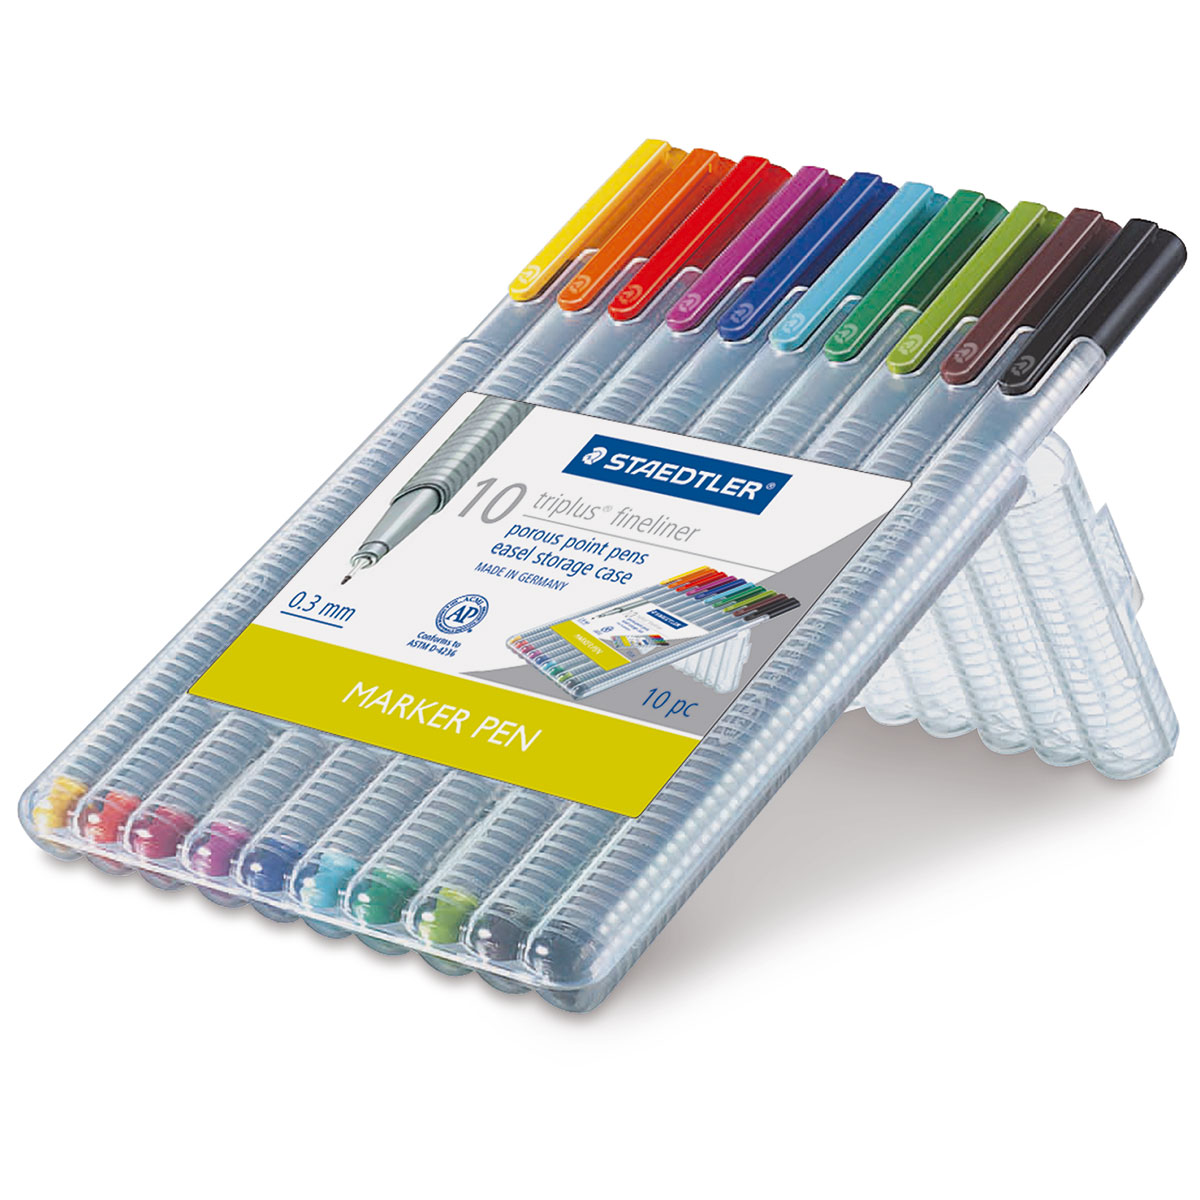 Coloring Supplies: The Best Markers, Colored Pencils, Gel Pens